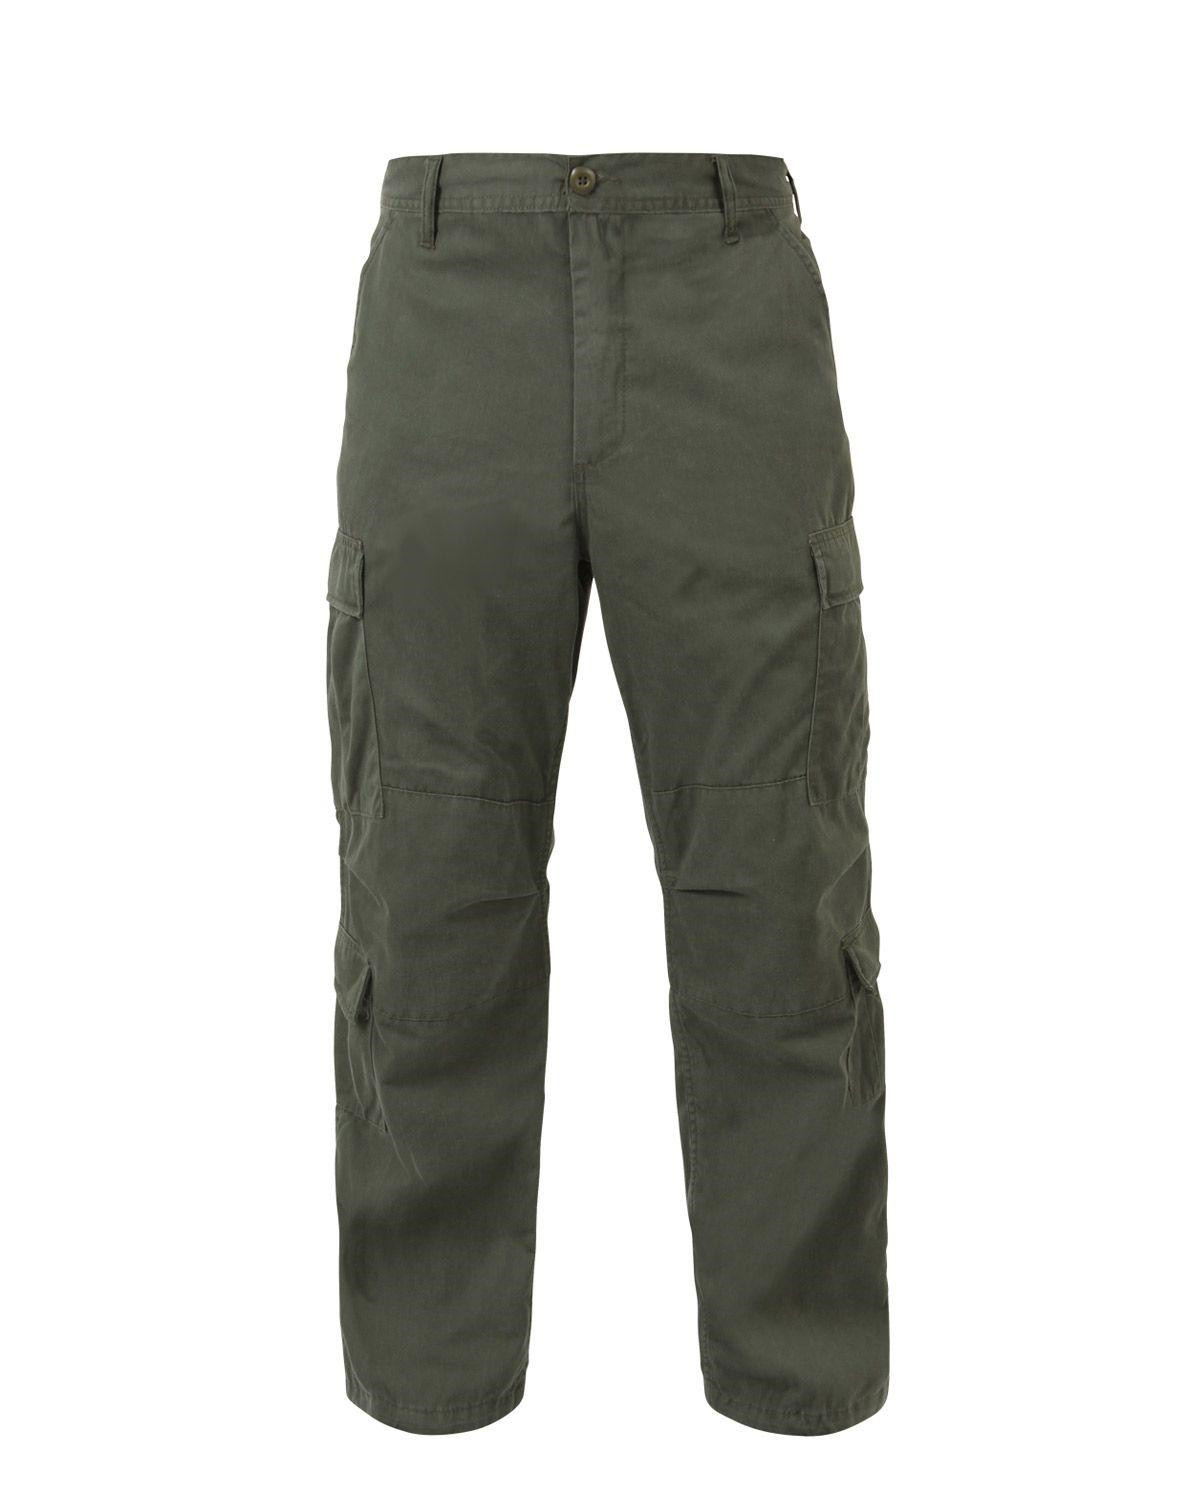 Rothco Paratrooper Bukser (Oliven, 2XL)